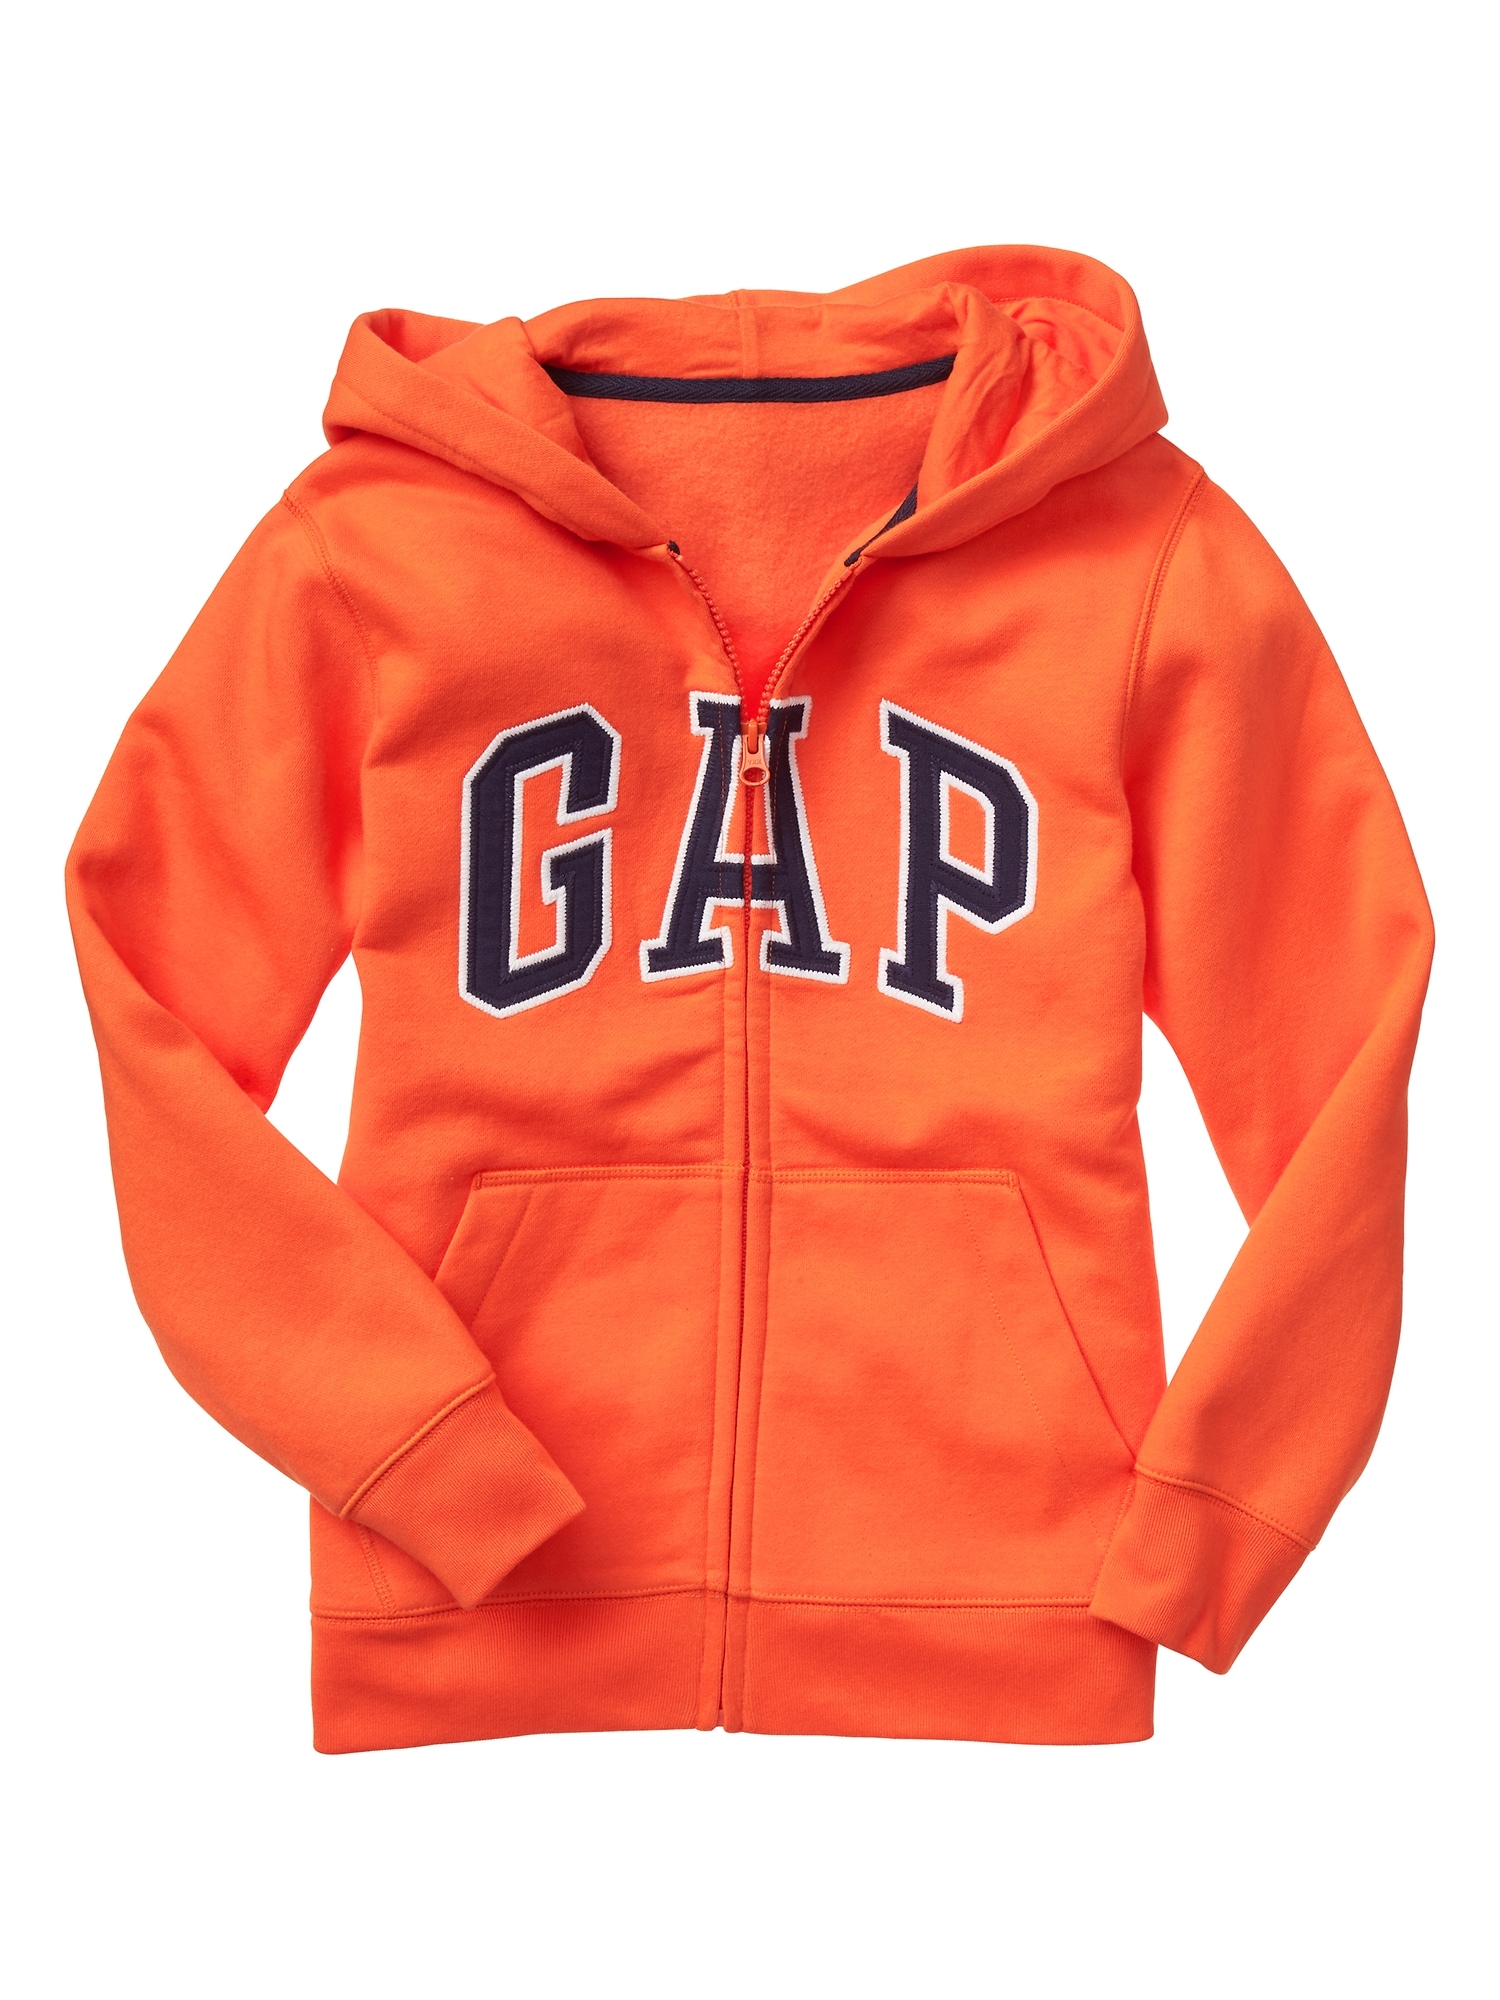 * GAP Red Arch Logo Zip Boys Size 10 Sweatshirt Hoodie brand new with Tags * 